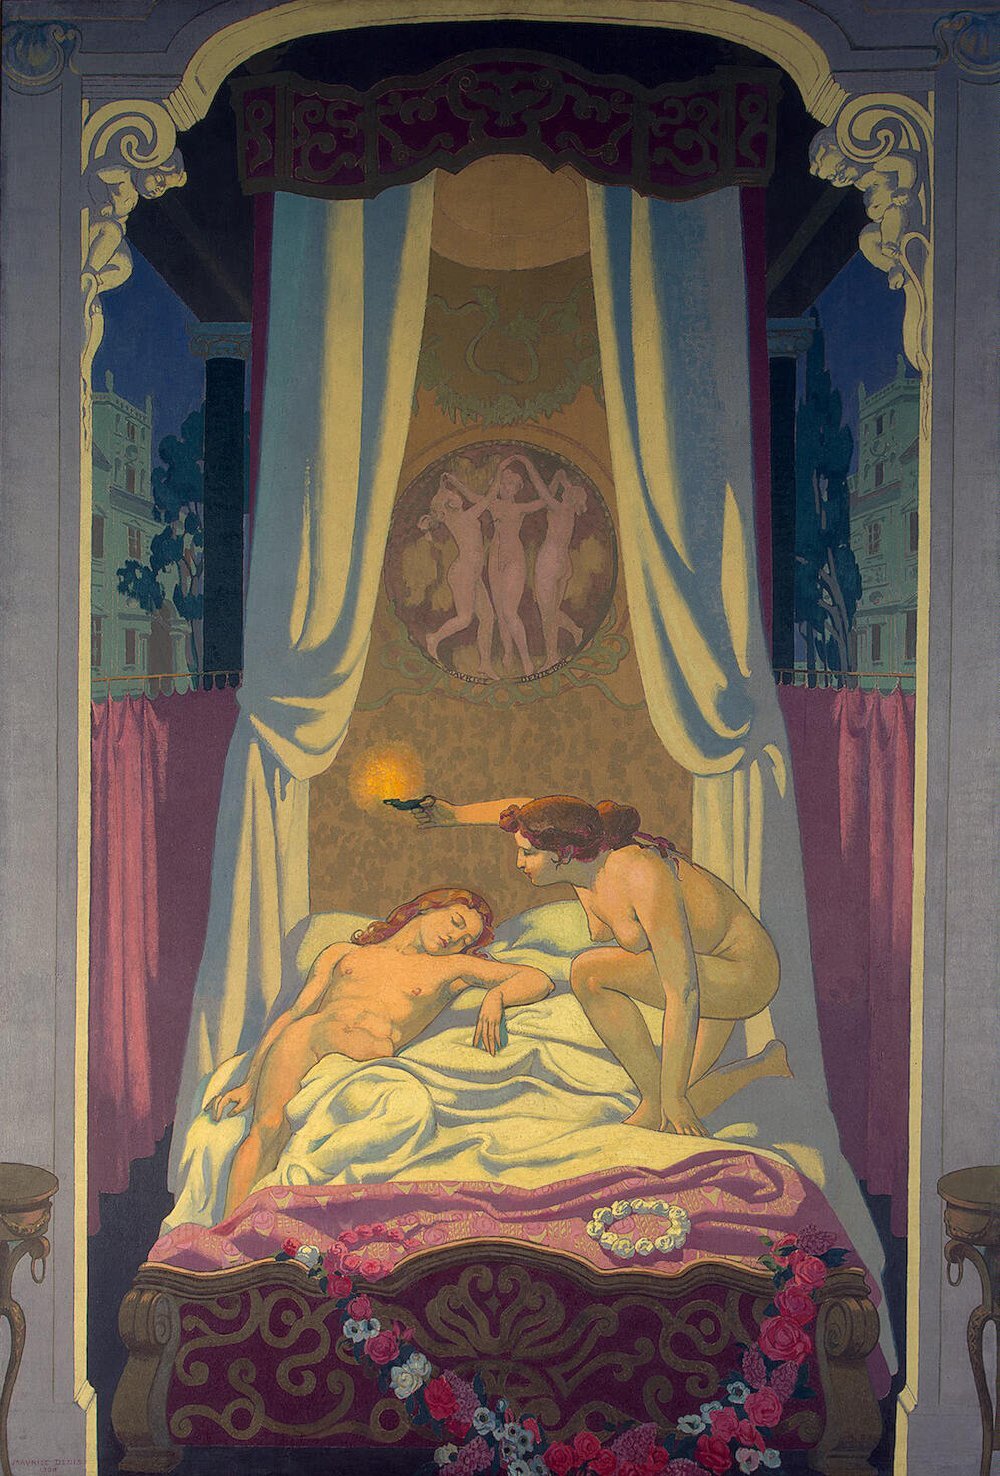 Panel 3 Psyche discovers that her mysterious lover is Eros, 1908